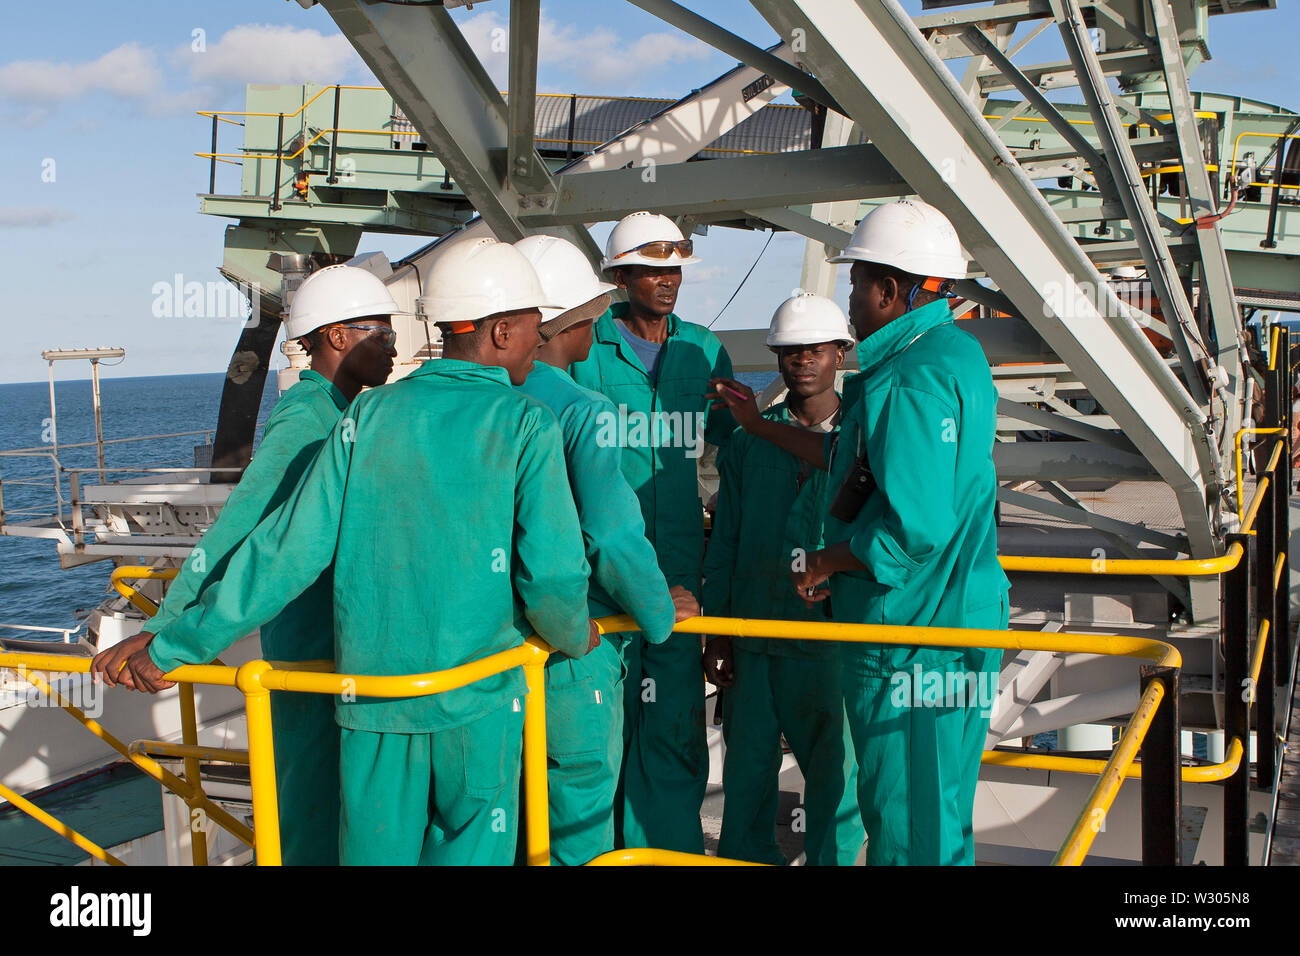 Port Operations for transporting of titanium mineral sands. Briefing on jetty movements of riggers & marine workers during barge loading operations. Stock Photo